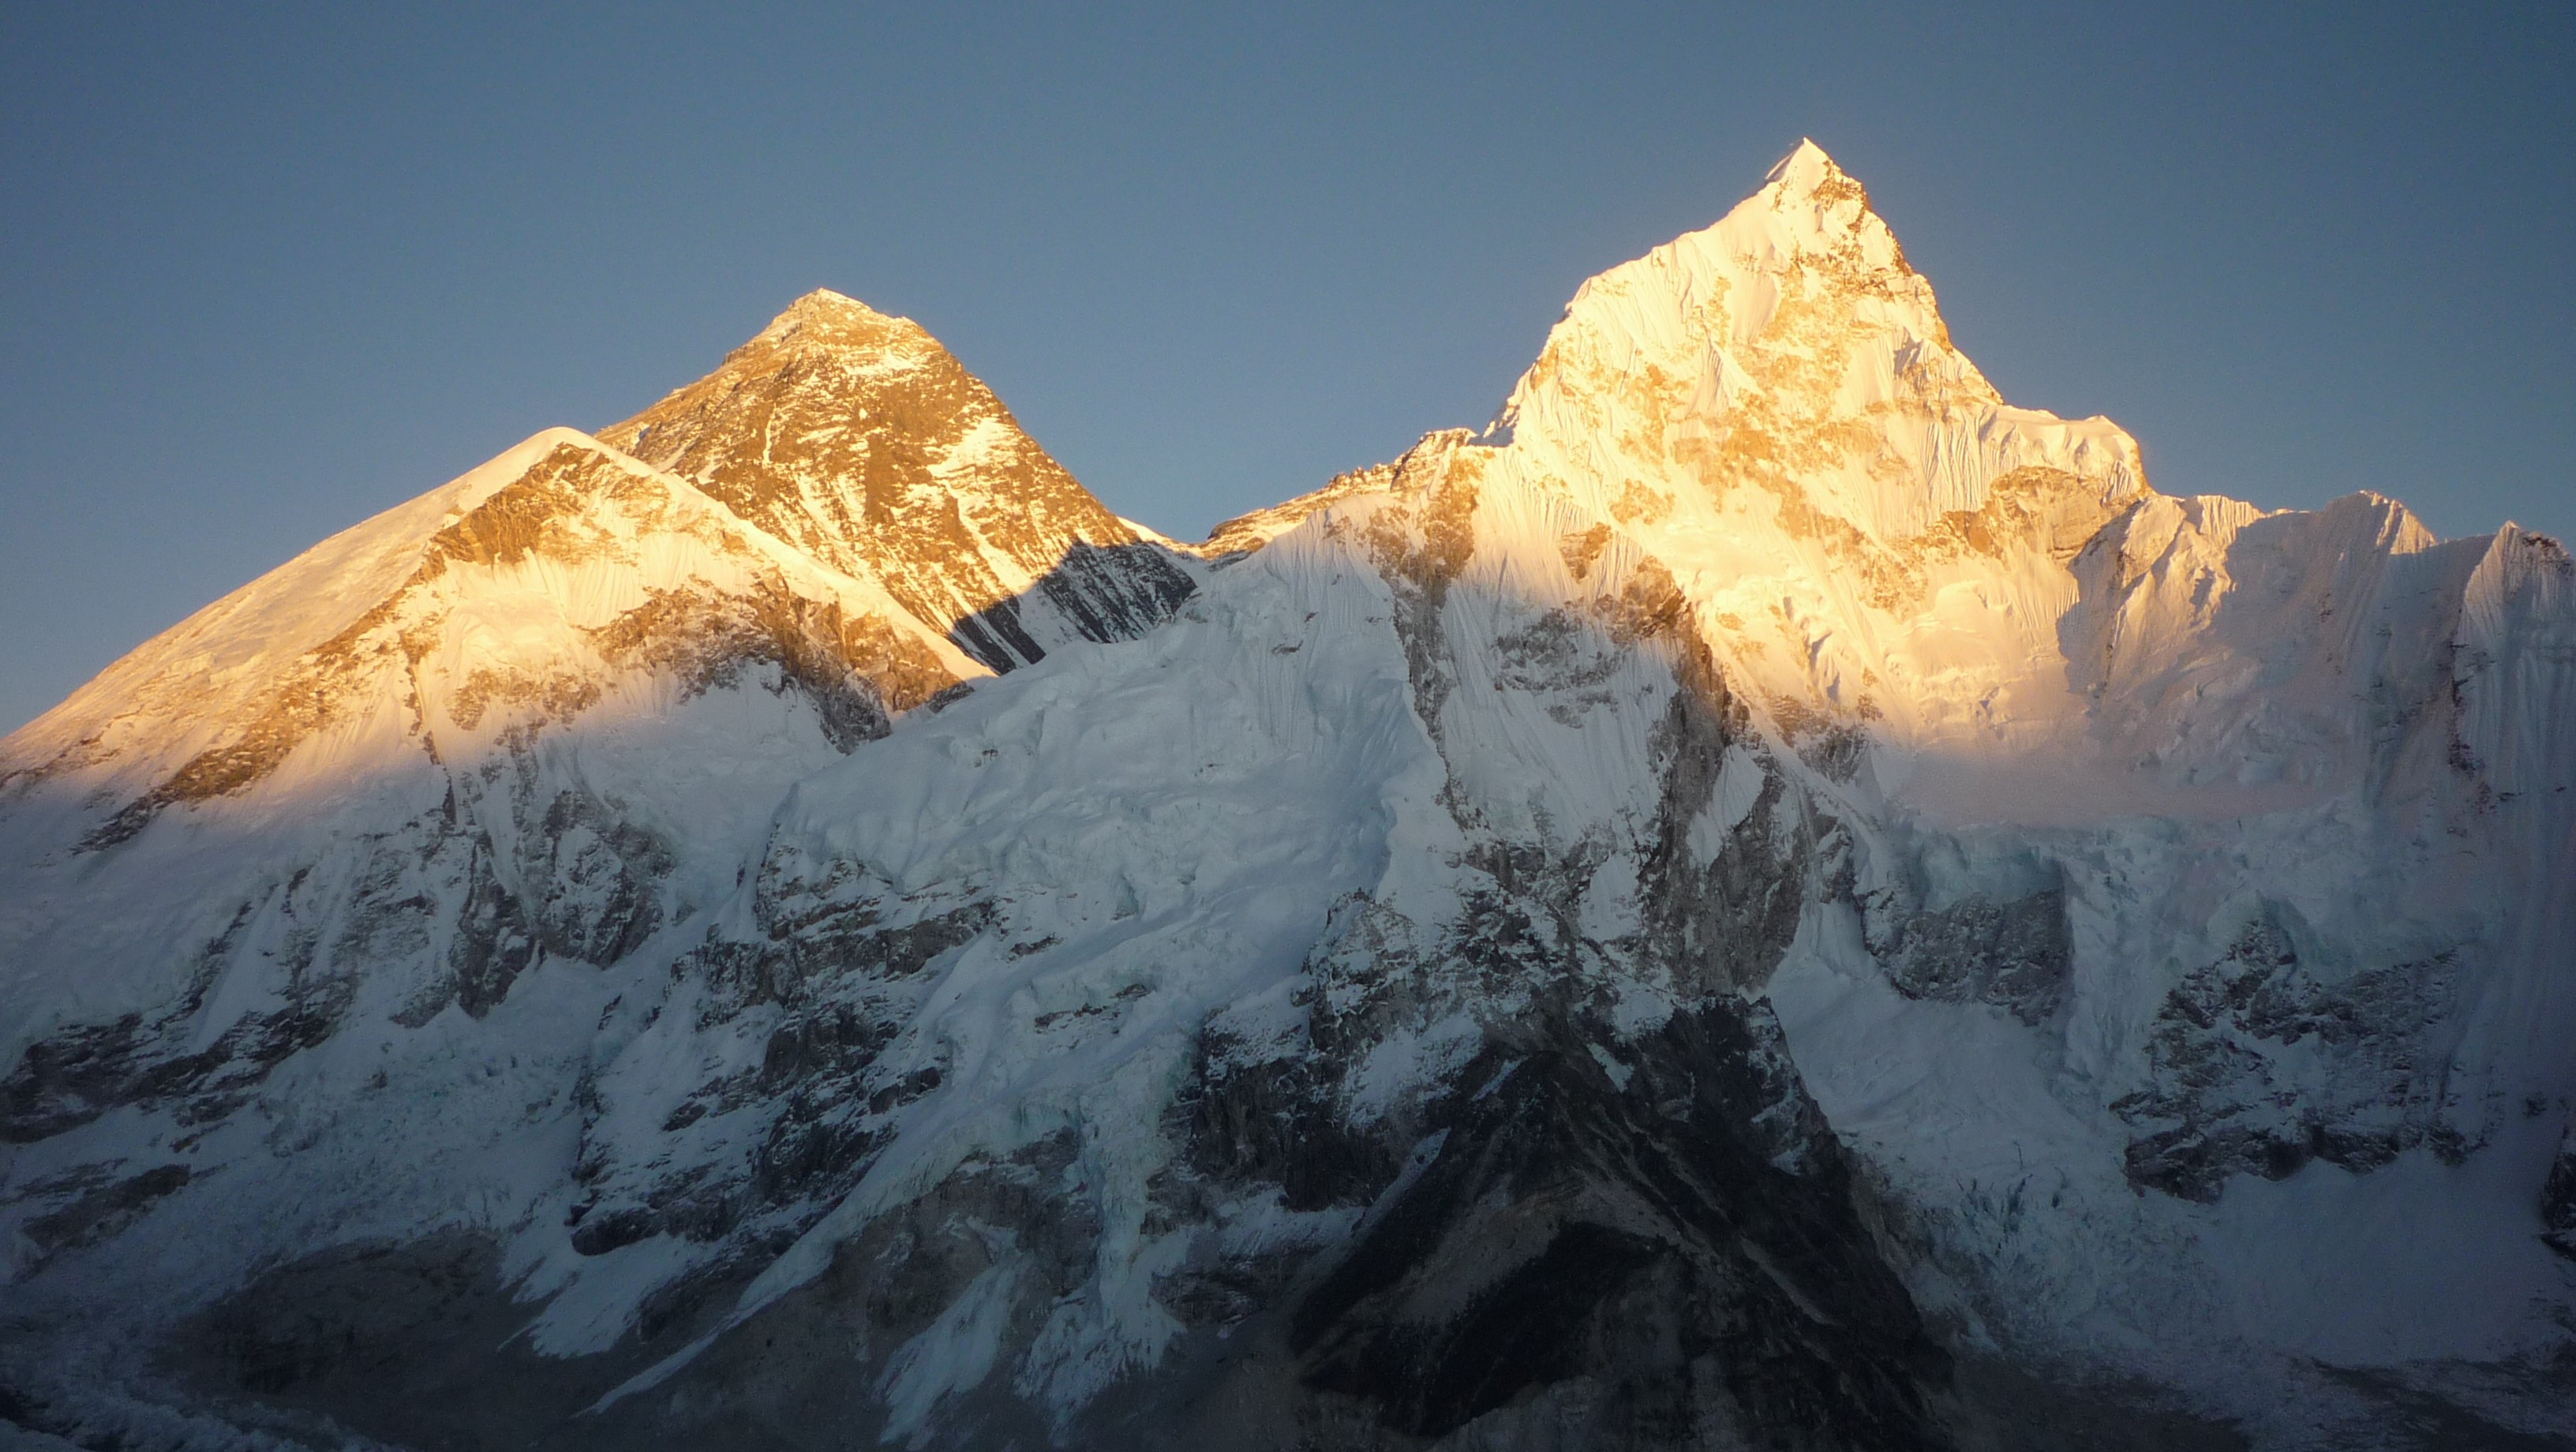 It's Official Mt. Everest Height Is 8848.86m